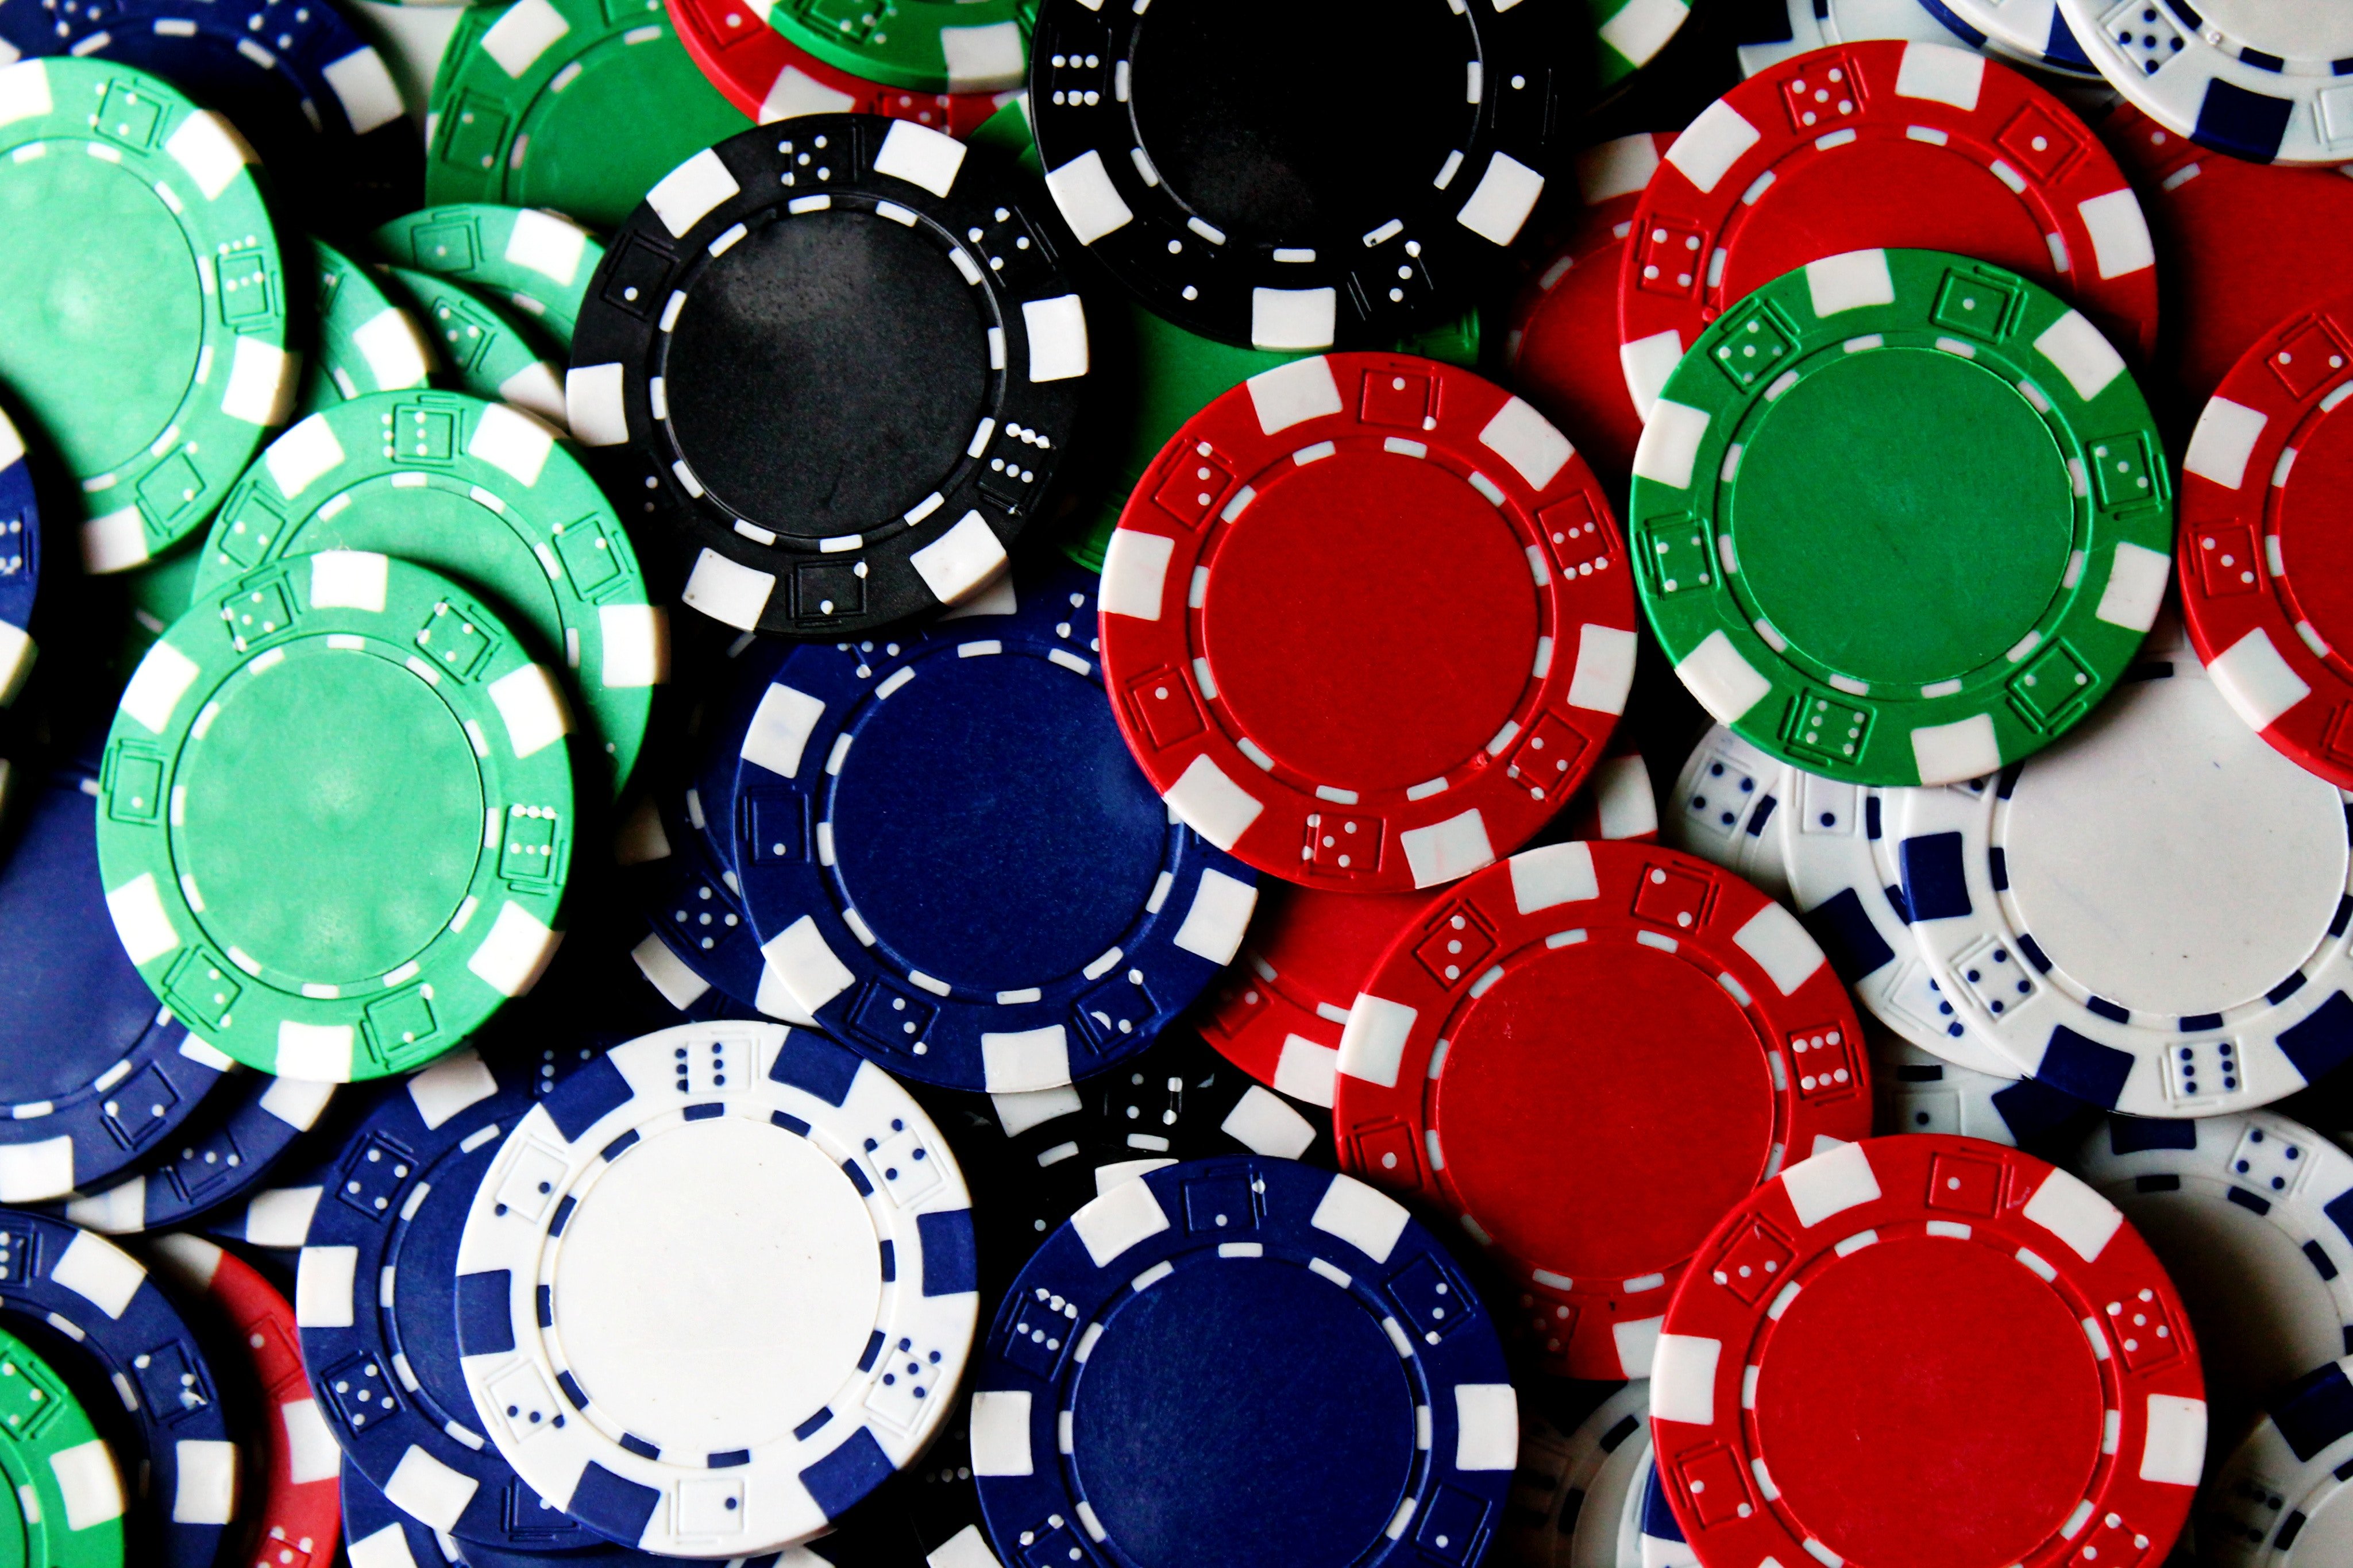 The Star Casino Chips